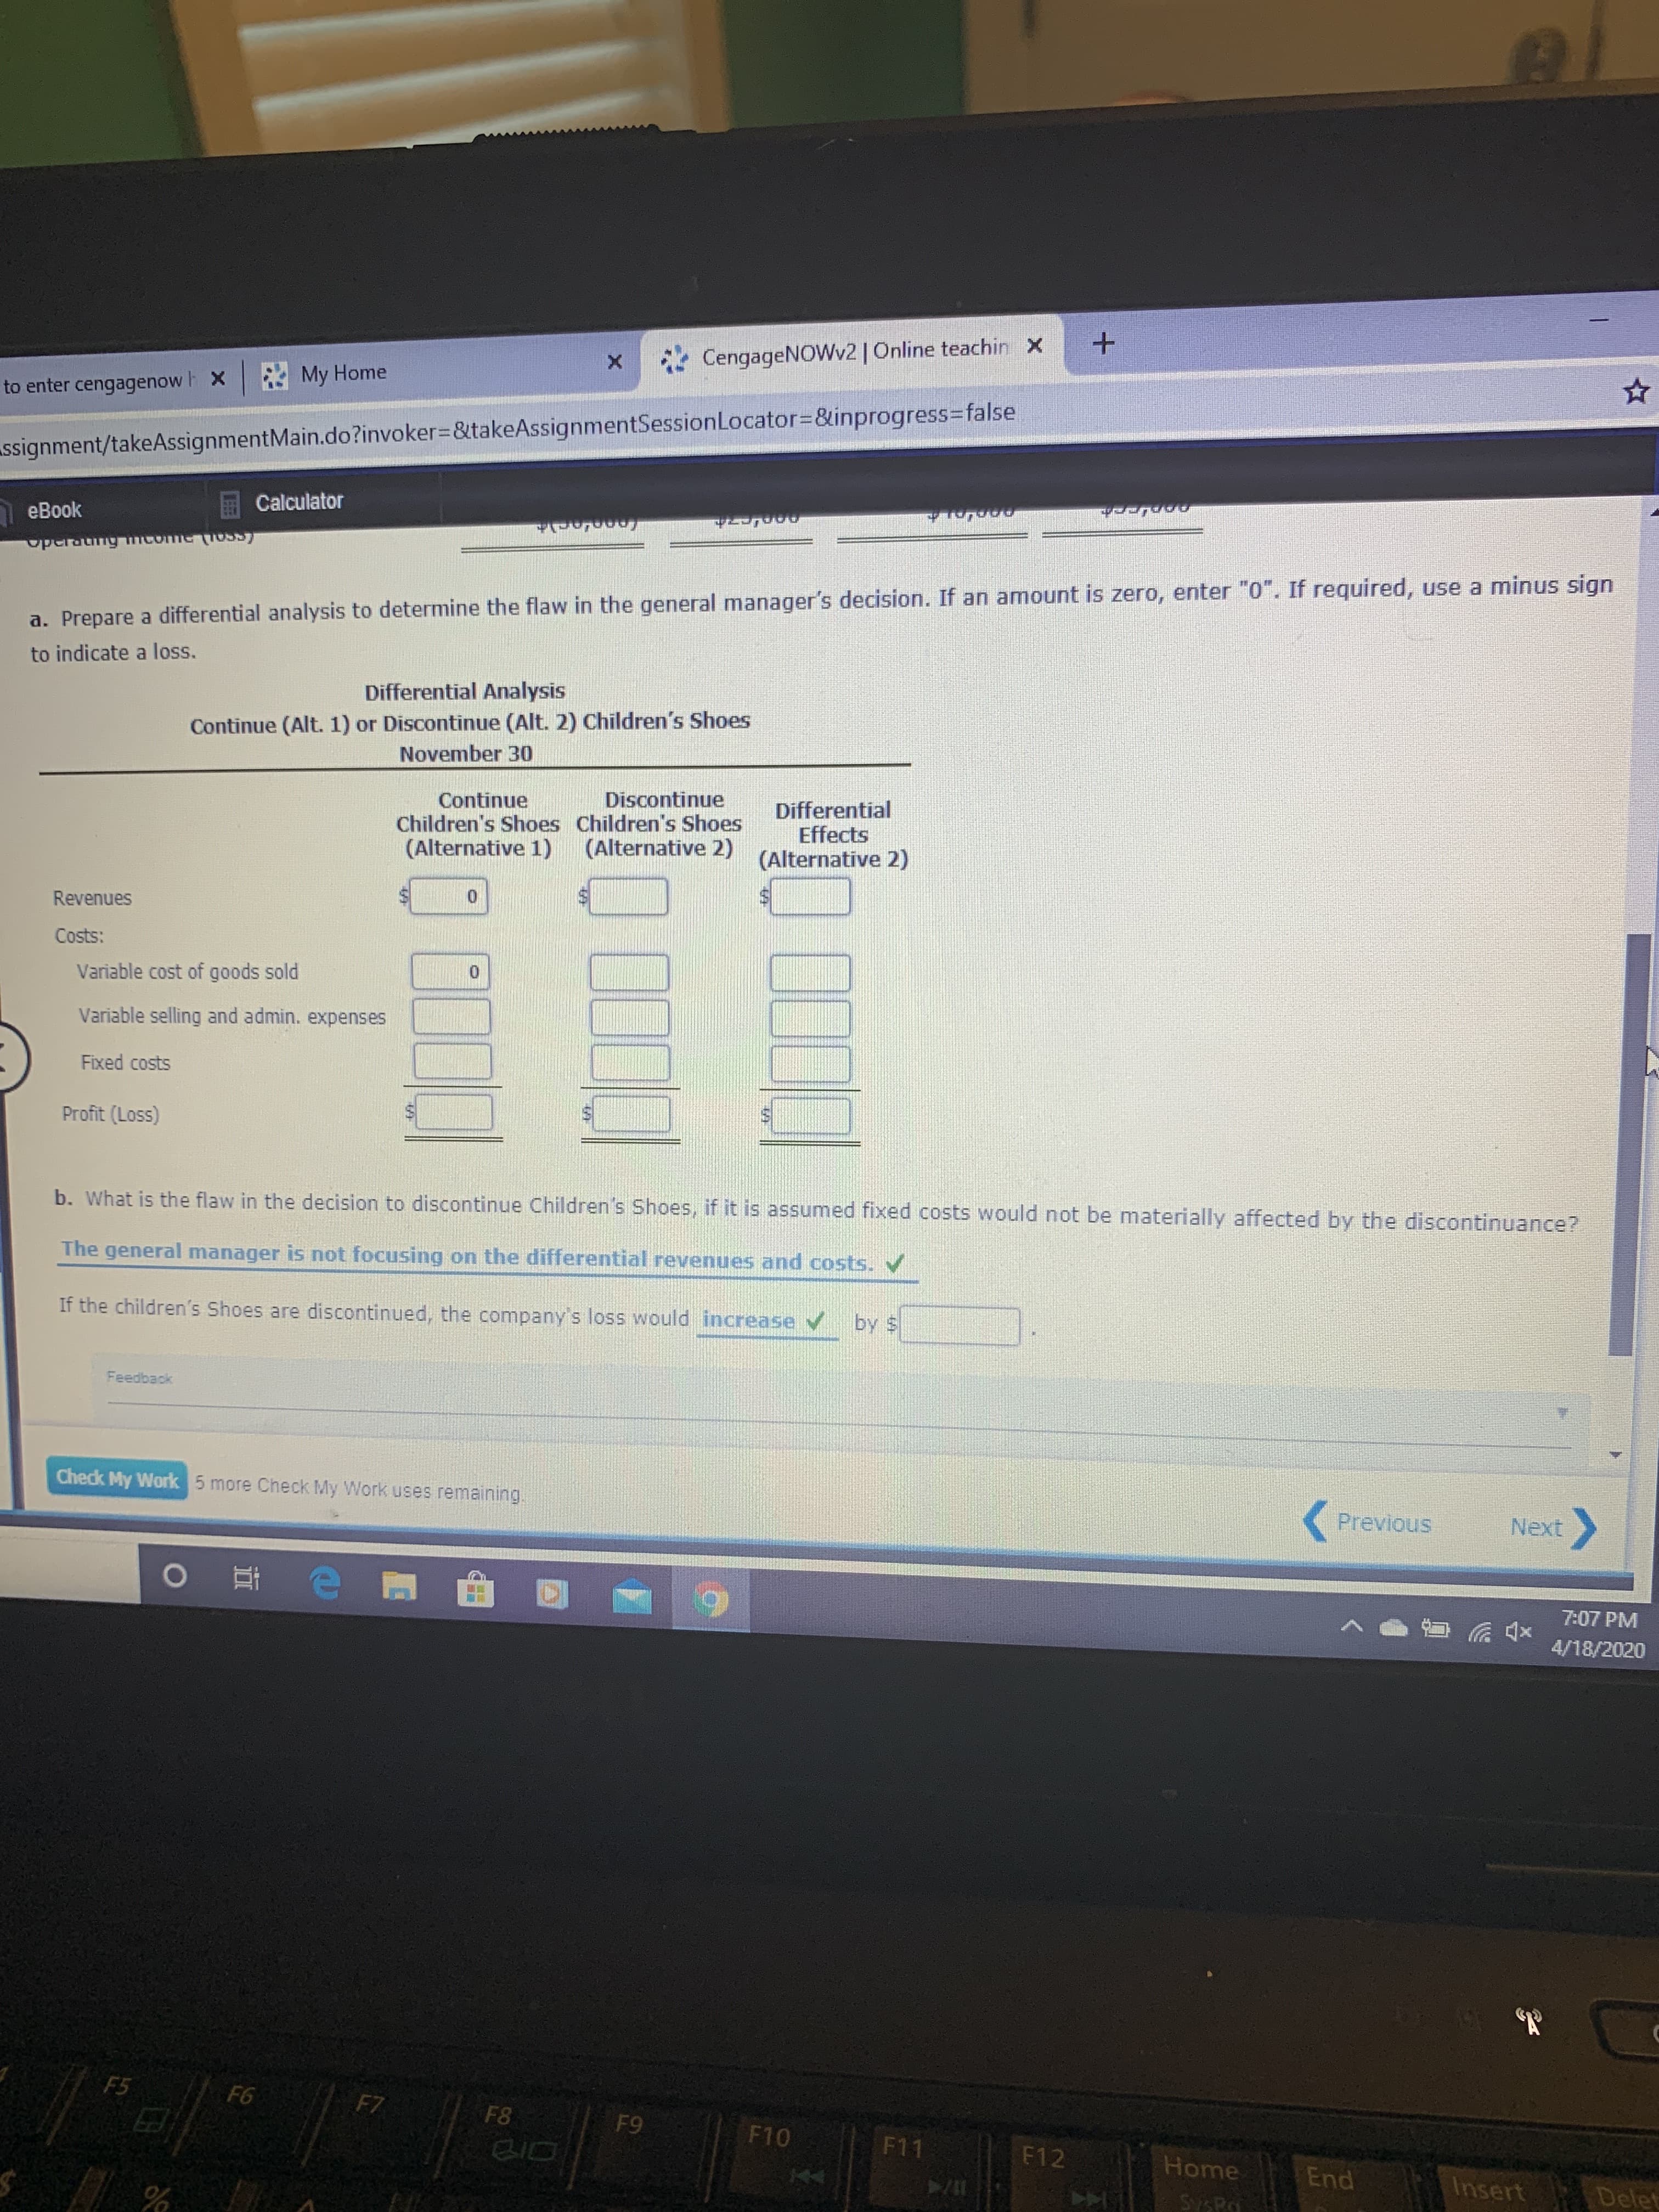 *CengageNOWv2 | Online teachin X
to enter cengagenow h X My Home
ssignment/takeAssignmentMain.do?invoker%3D&takeAssignmentSessionLocator=D&inprogress%3Dfalse
E Calculator
eBook
operaung mcome (OSS
a. Prepare a differential analysis to determine the flaw in the general manager's decision. If an amount is zero, enter "0". If required, use a minus sign
to indicate a loss.
Differential Analysis
Continue (Alt. 1) or Discontinue (Alt. 2) Children's Shoes
November 30
Discontinue
Continue
Children's Shoes Children's Shoes
(Alternative 1)
Differential
Effects
(Alternative 2)
(Alternative 2)
Revenues
Costs:
Variable cost of goods sold
Variable selling and admin. expenses
Fixed costs
Profit (Loss)
b. What is the flaw in the decision to discontinue Children's Shoes, if it is assumed fixed costs would not be materially affected by the discontinuance?
The general manager is not focusing on the differential revenues and costs. V
If the children's Shoes are discontinued, the company's loss would increase v by S
Feedback
Check My Work 5 more Check My Work uses remaining.
Previous
Next
7:07 PM
4/18/2020
F5
F6
F7
F8
F9
F10
BID
F11
F12
Home
End
Insert
Delet
SysRa
